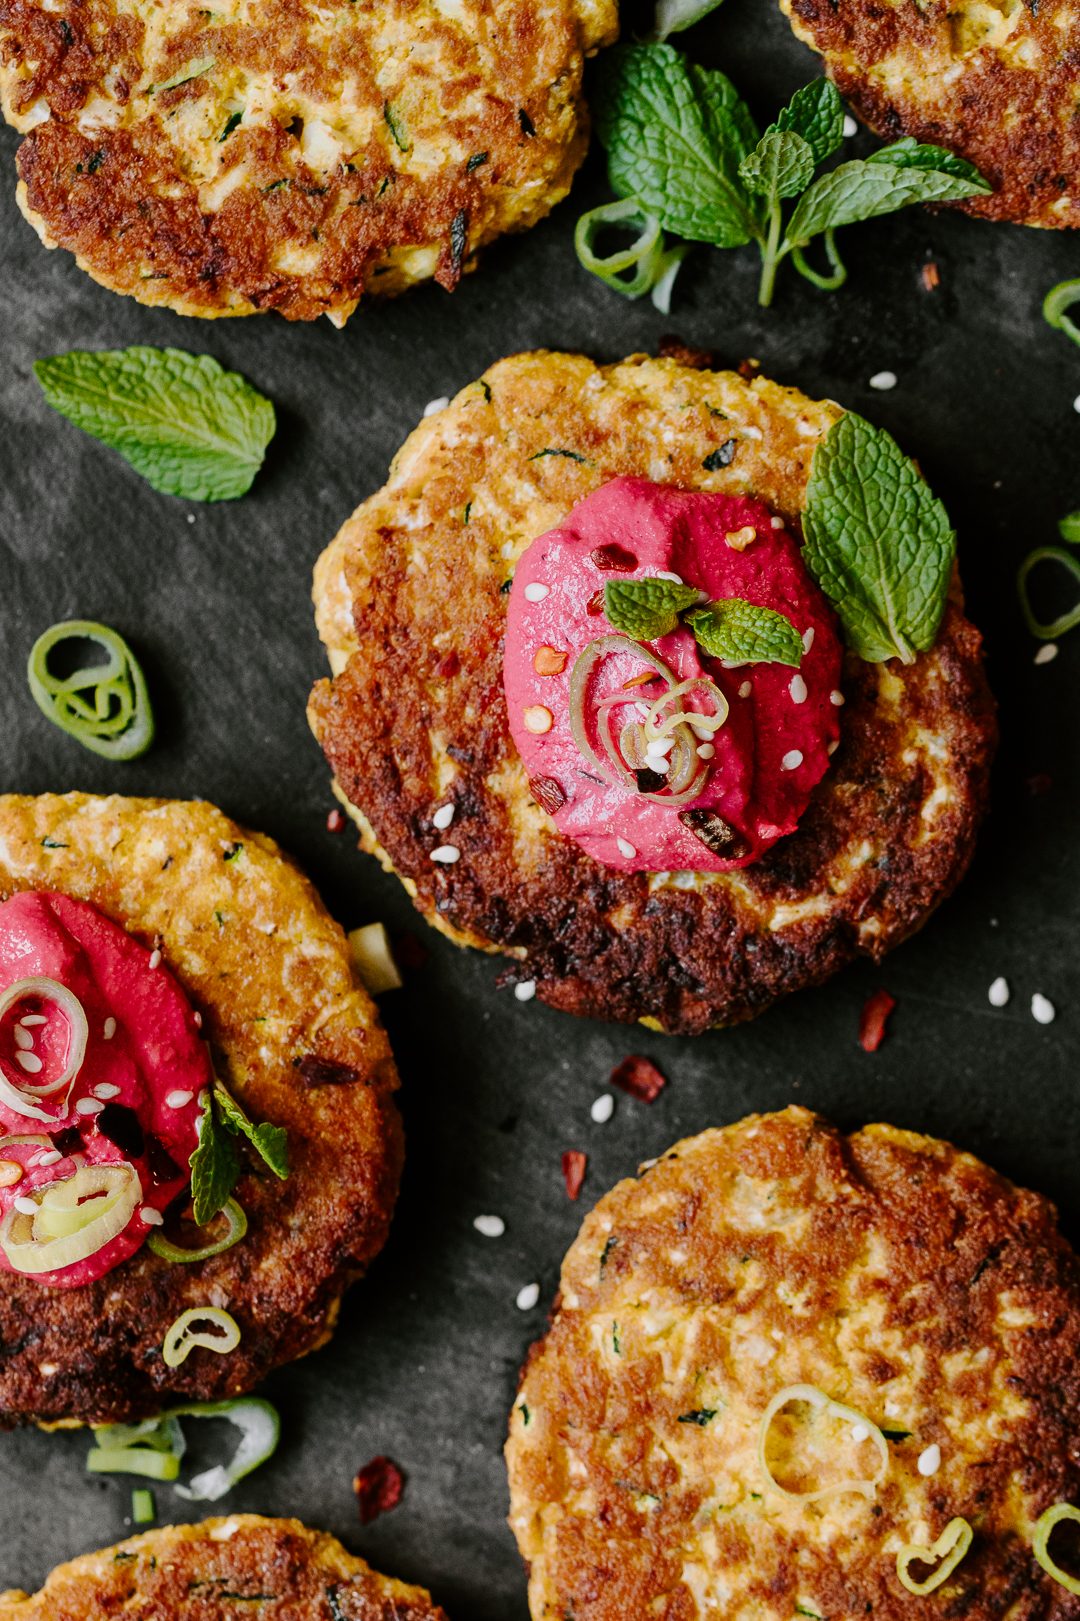 Low_Carb_Cauliflower_and_Zucchini_Fritters_by_Jordan_Pie_Nutritionist_Photographer-1.jpg